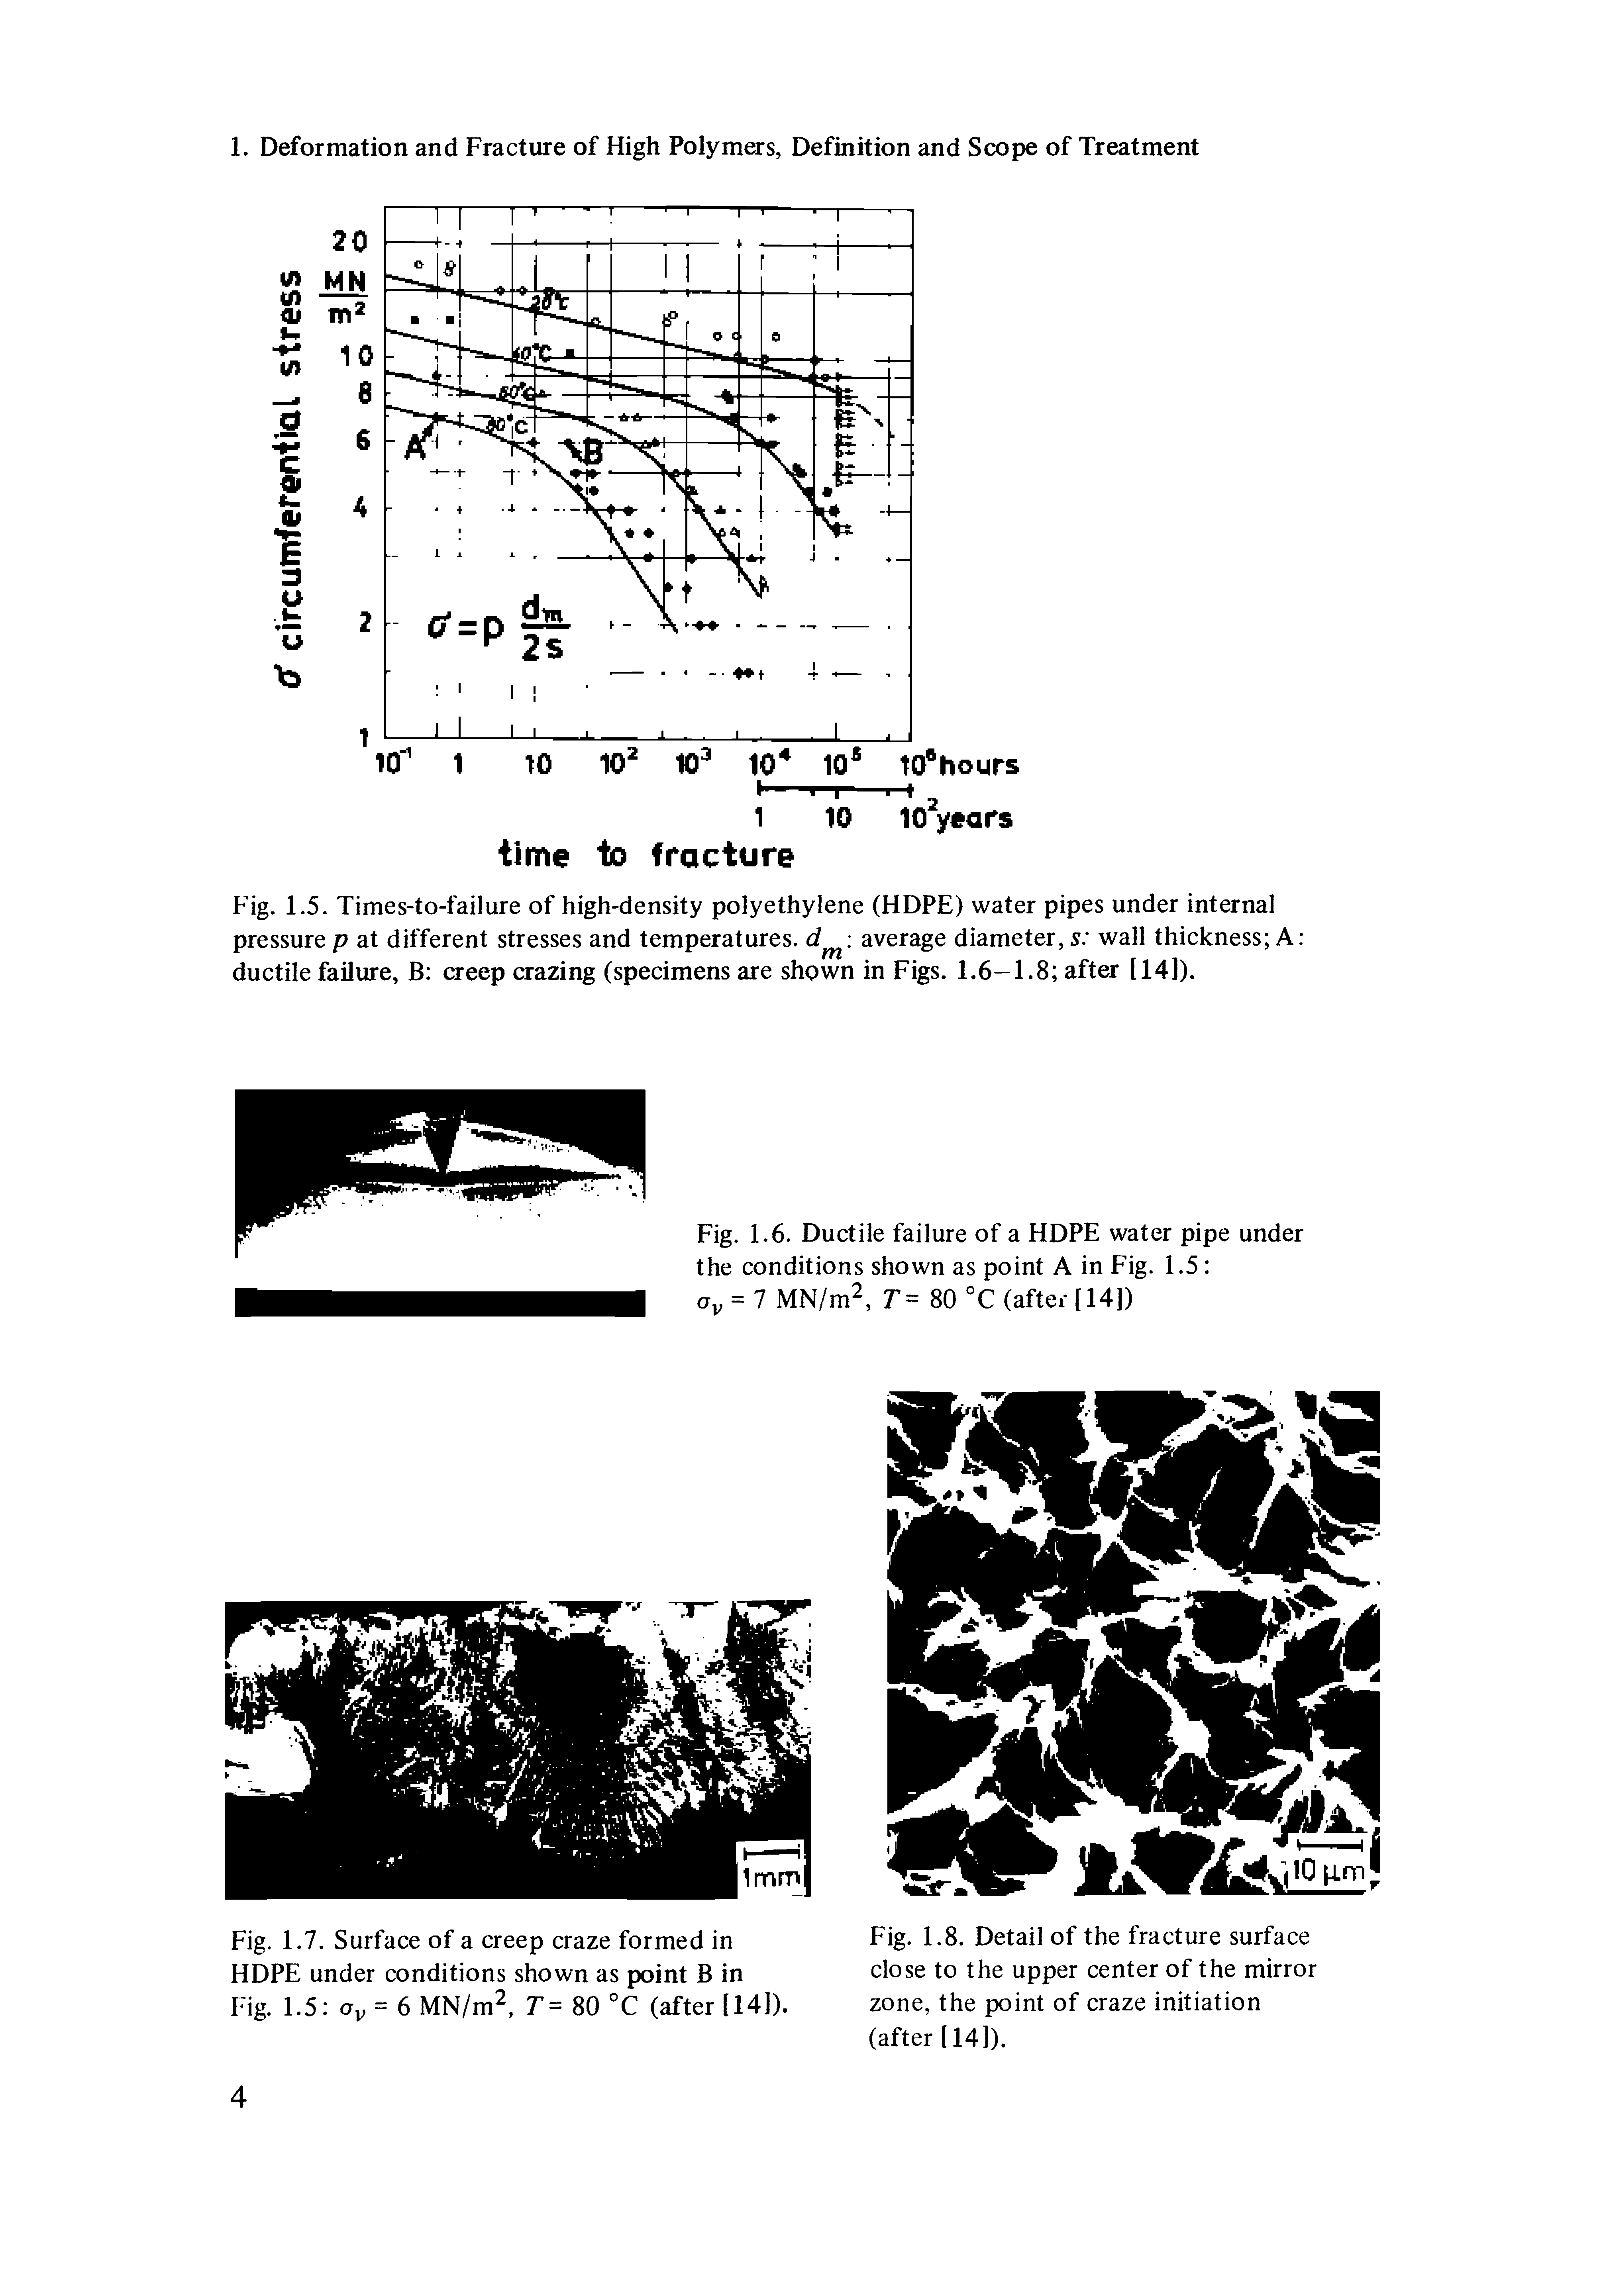 Fig. 1.8. Detail of the fracture surface close to the upper center of the mirror zone, the point of craze initiation (after [14]).